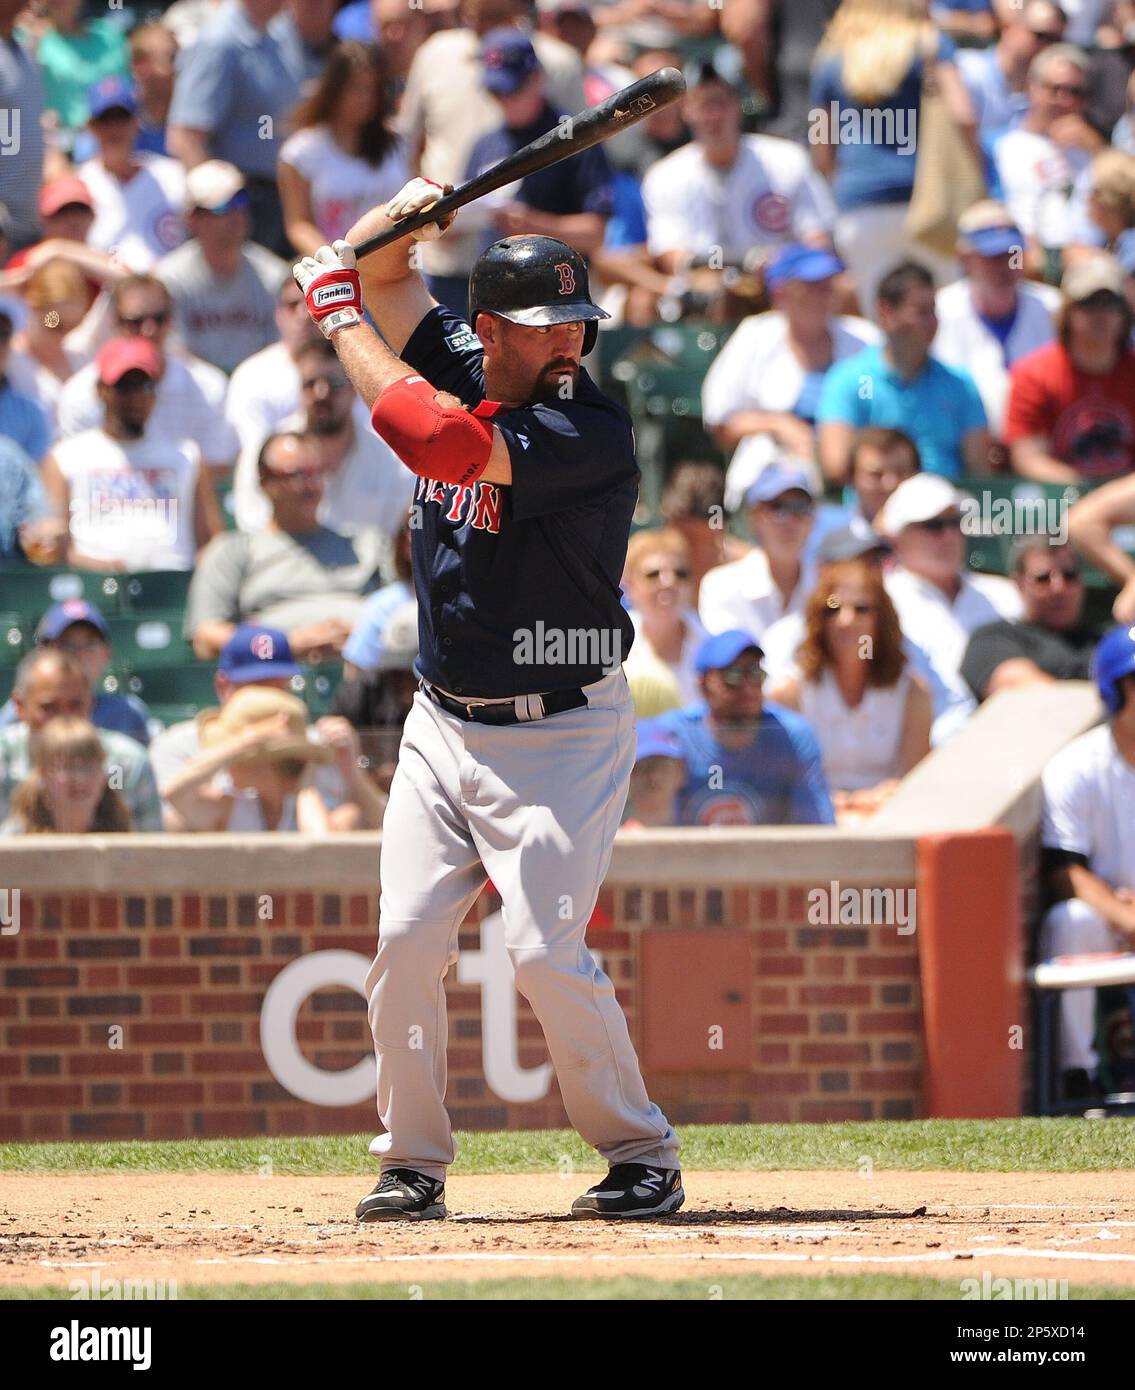 KEVIN YOUKILIS (20) of the Boston Red Sox in action during the Red